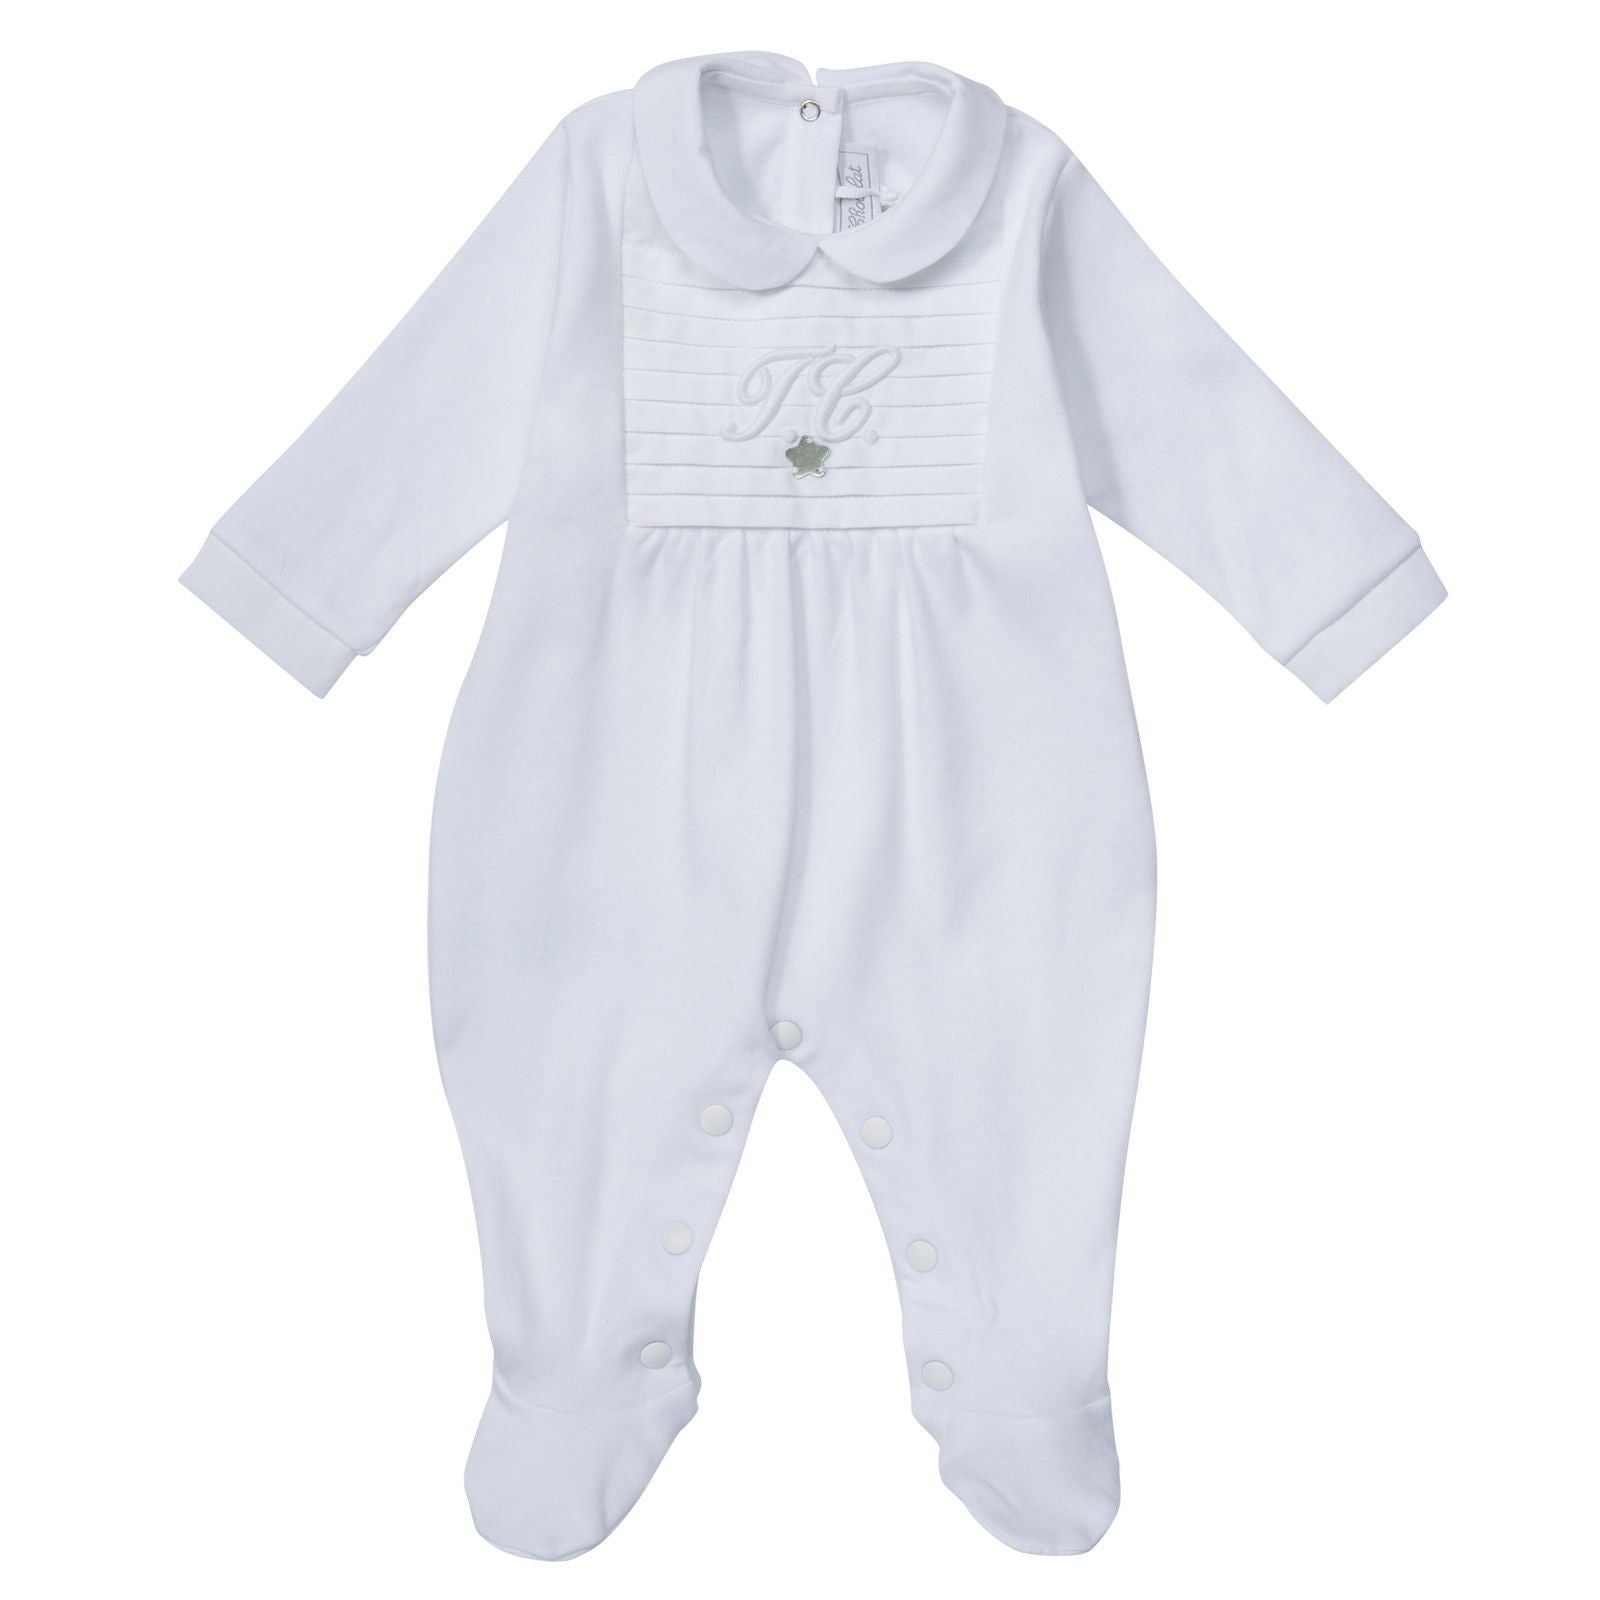 Baby White Babygrow with Embroidered Logo - CÉMAROSE | Children's Fashion Store - 1